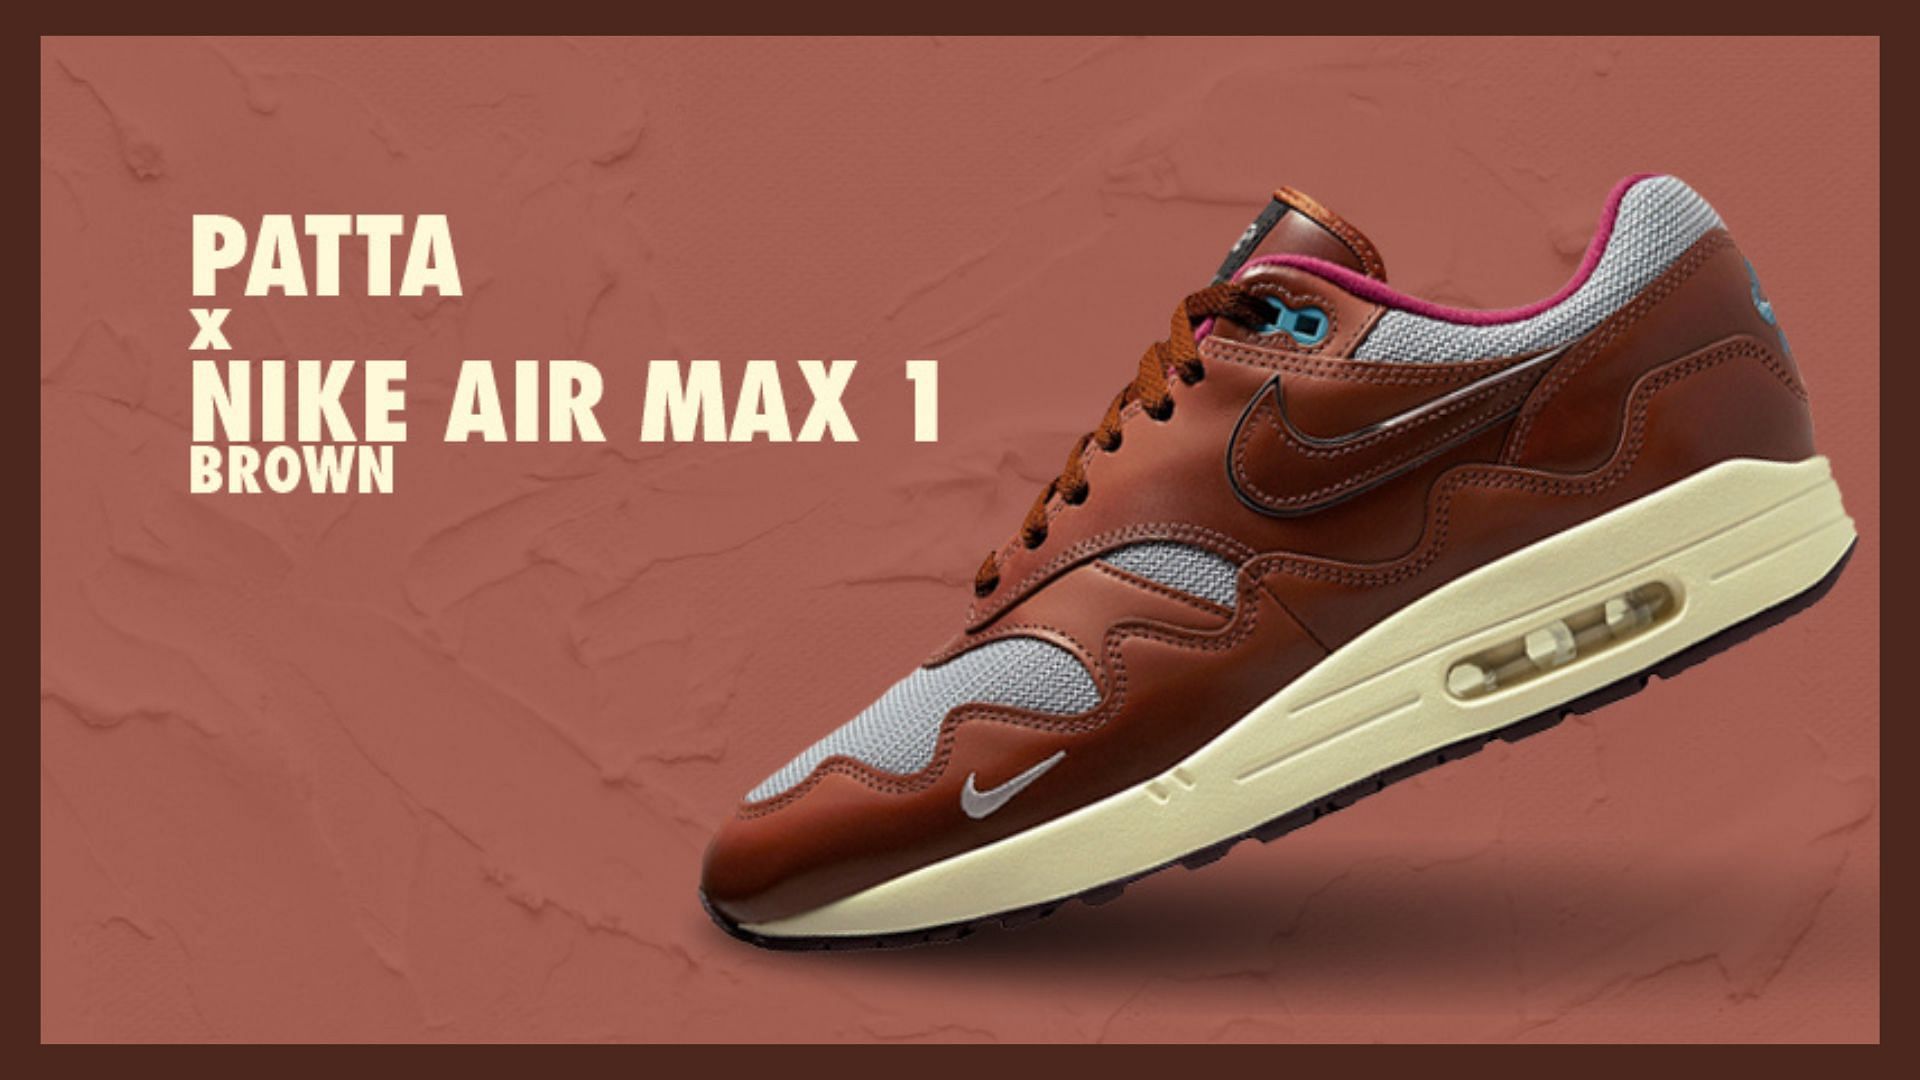 The Patta x Nike Air Max 1 Brown colorway (Image via Twitter/fastsoleuk)